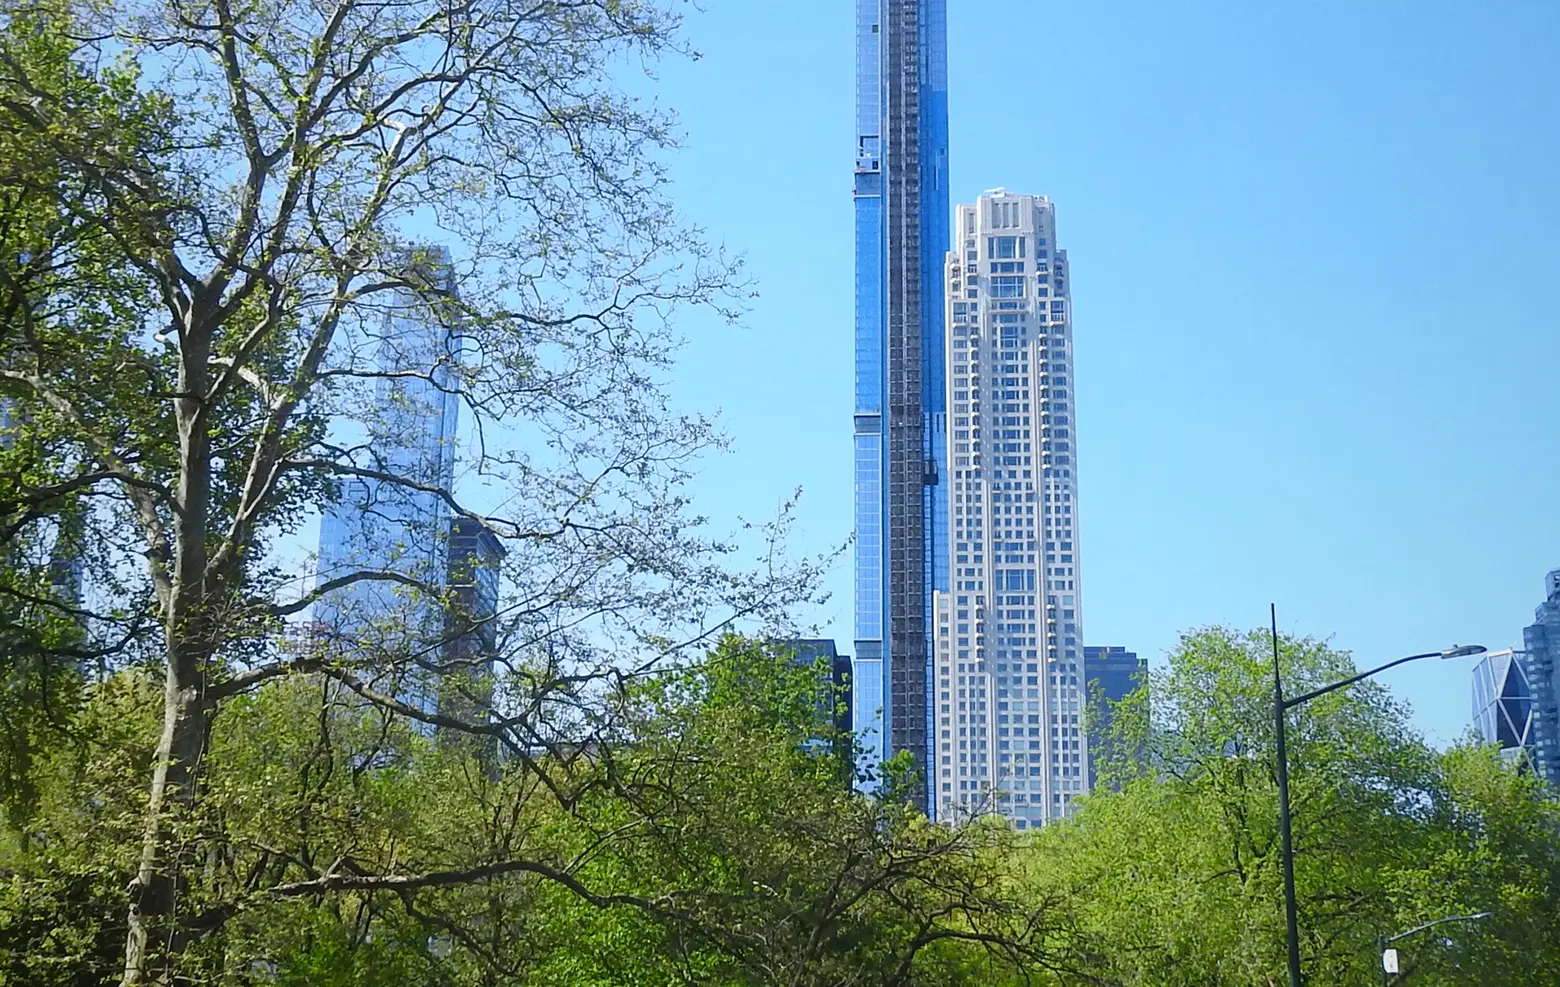 $100M penthouse closes at 220 Central Park South, third-most-expensive NYC sale ever